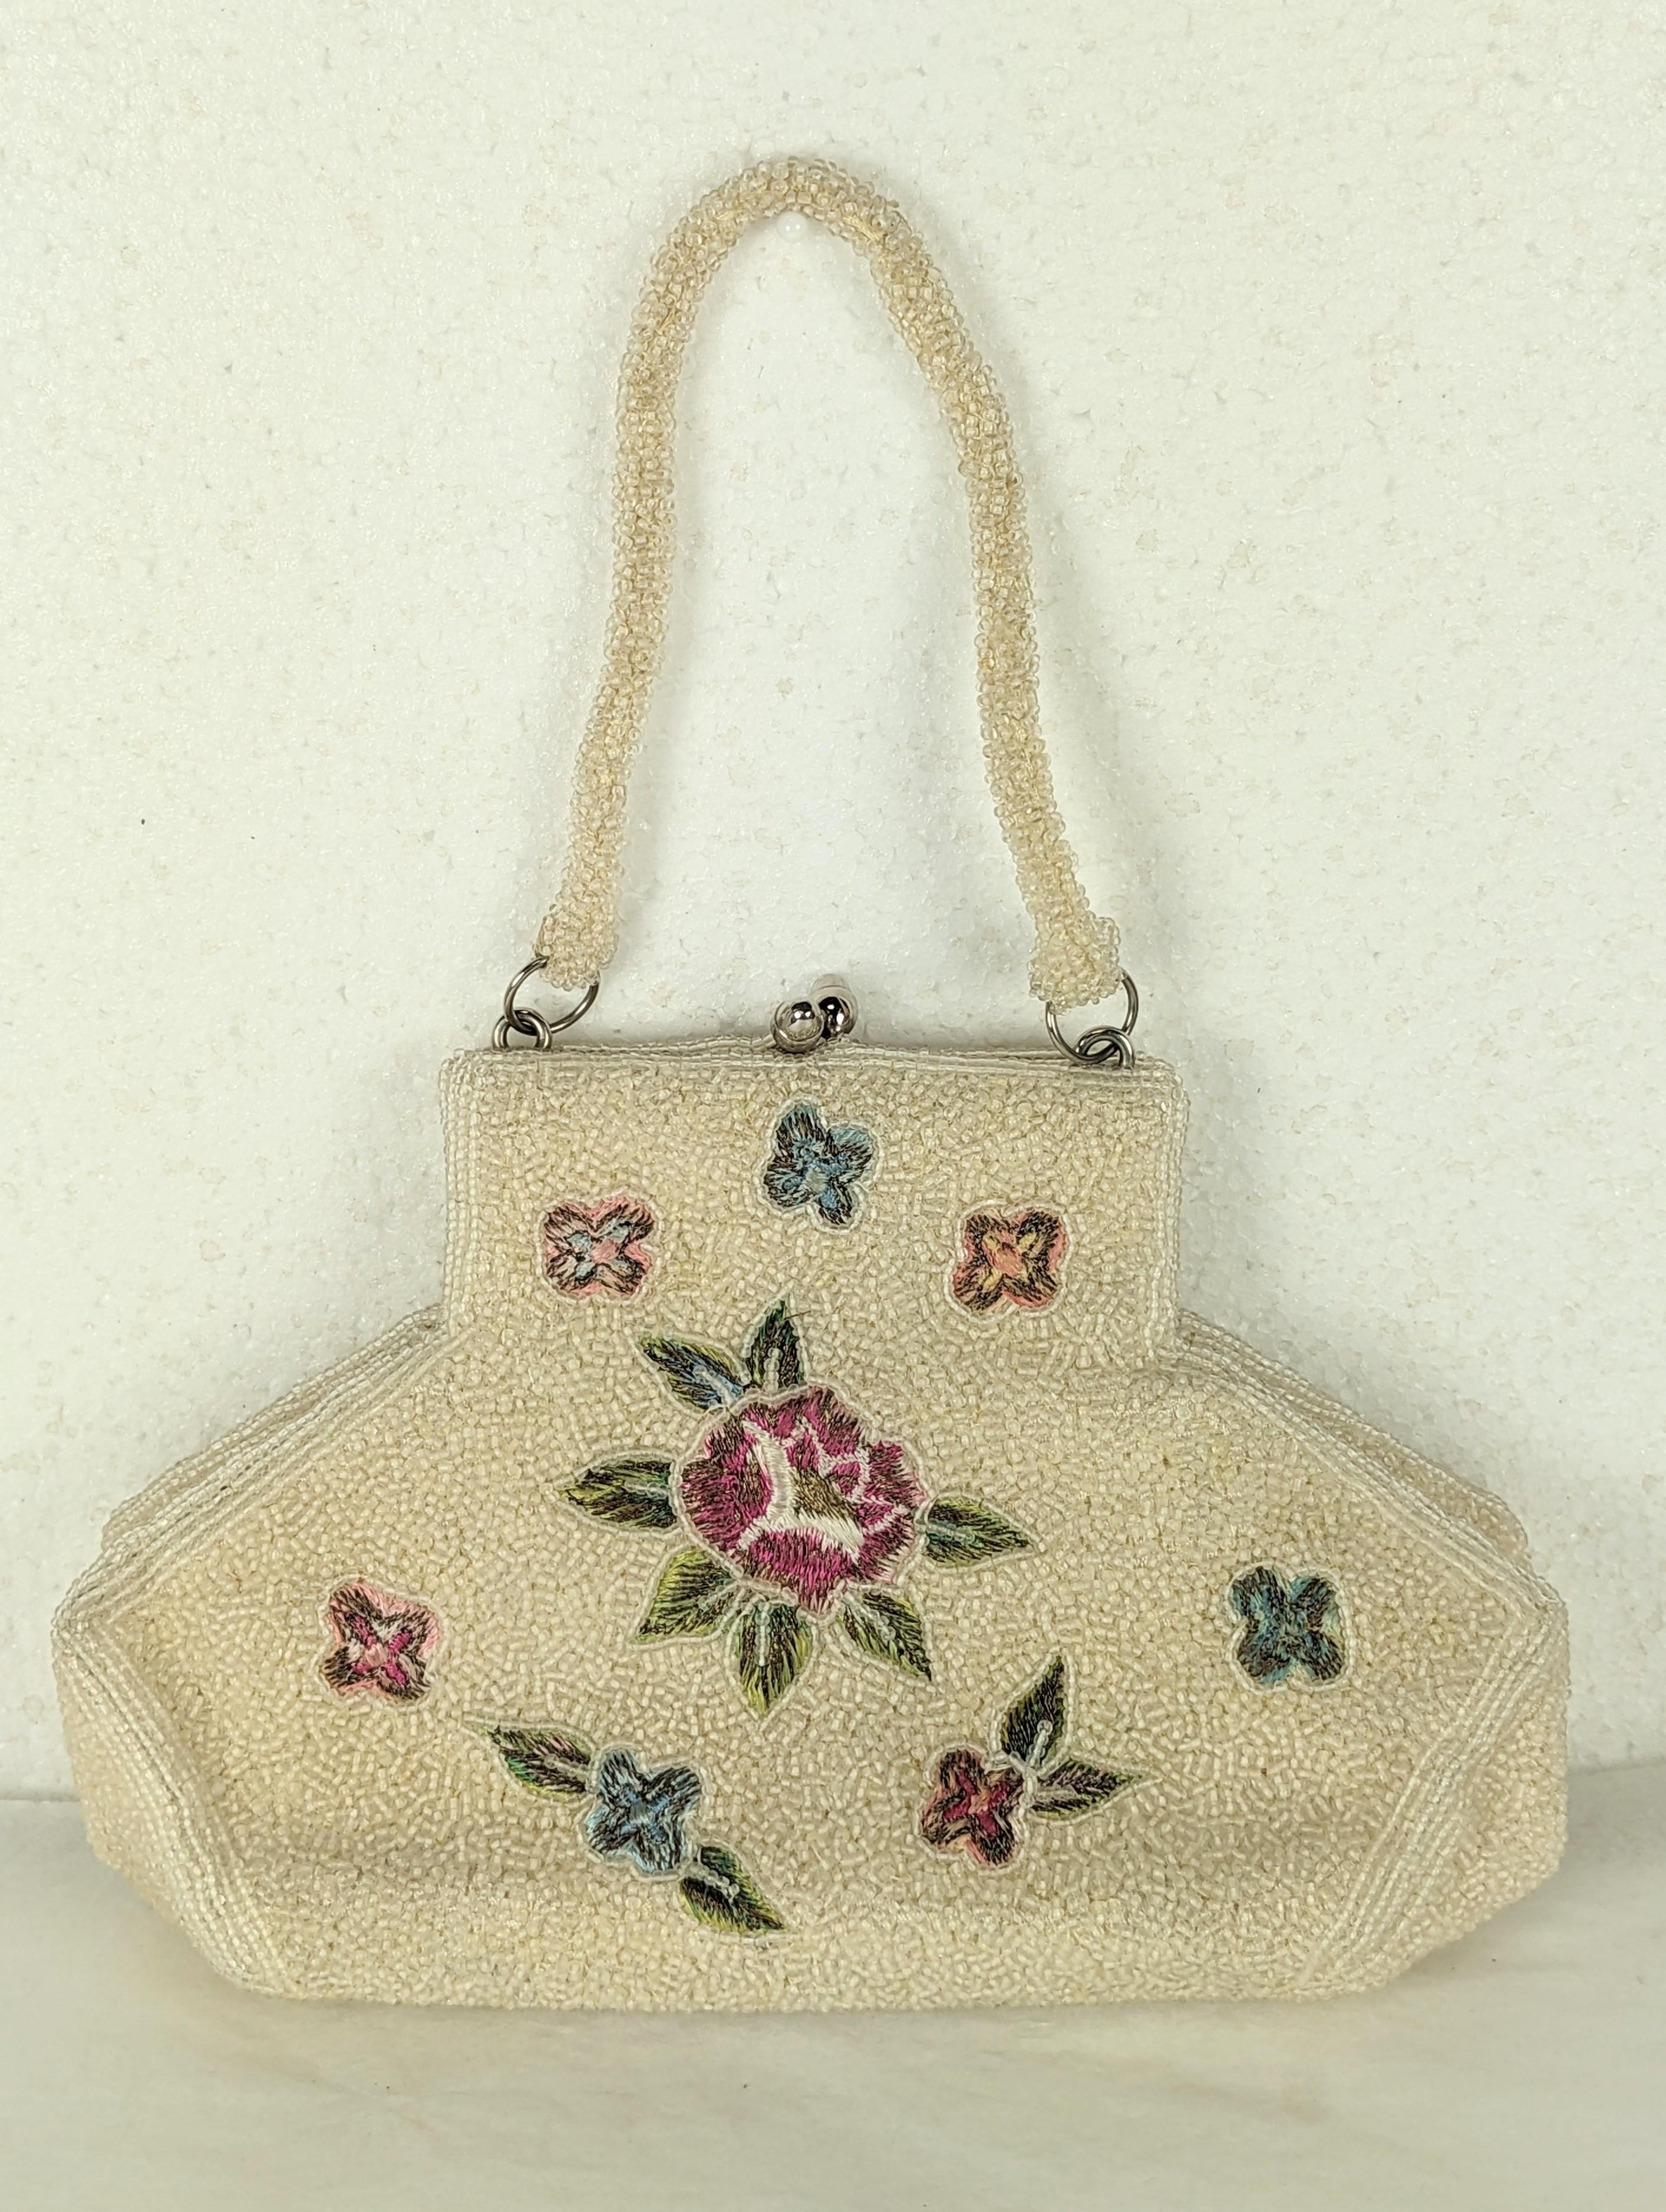 Unusual Beaded and Embroidered Bag by Charlet Bags. Flowers are hand embroidered with colored silk thread and metallic floss on a base of ivory seed beads. Shape is unusual but holds alot at bottom. 1950's Japan. 
8